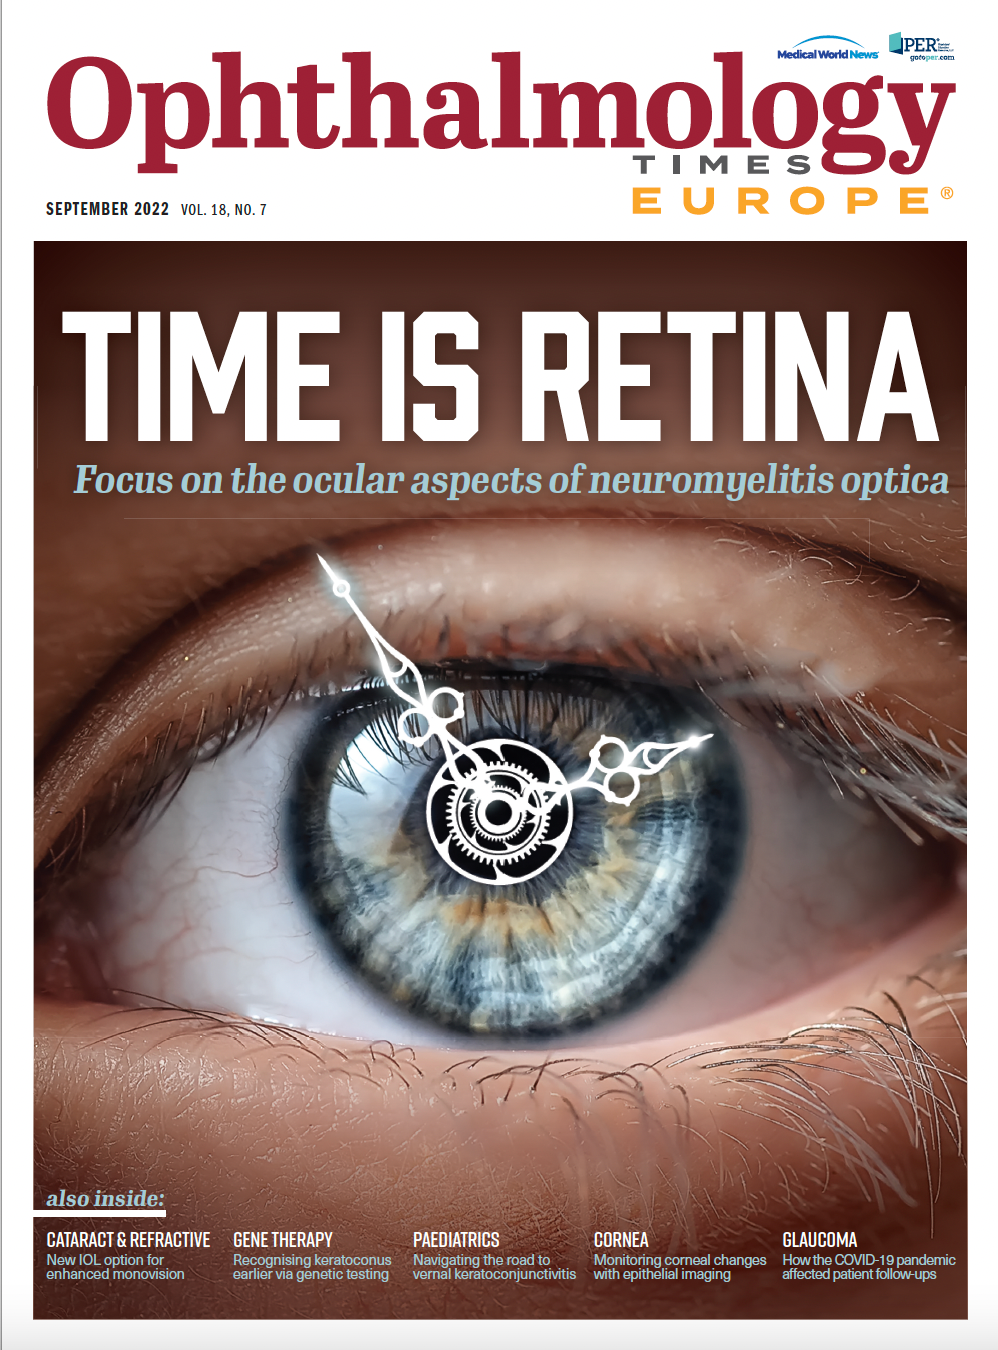 Ophthalmology Times Europe September 2022